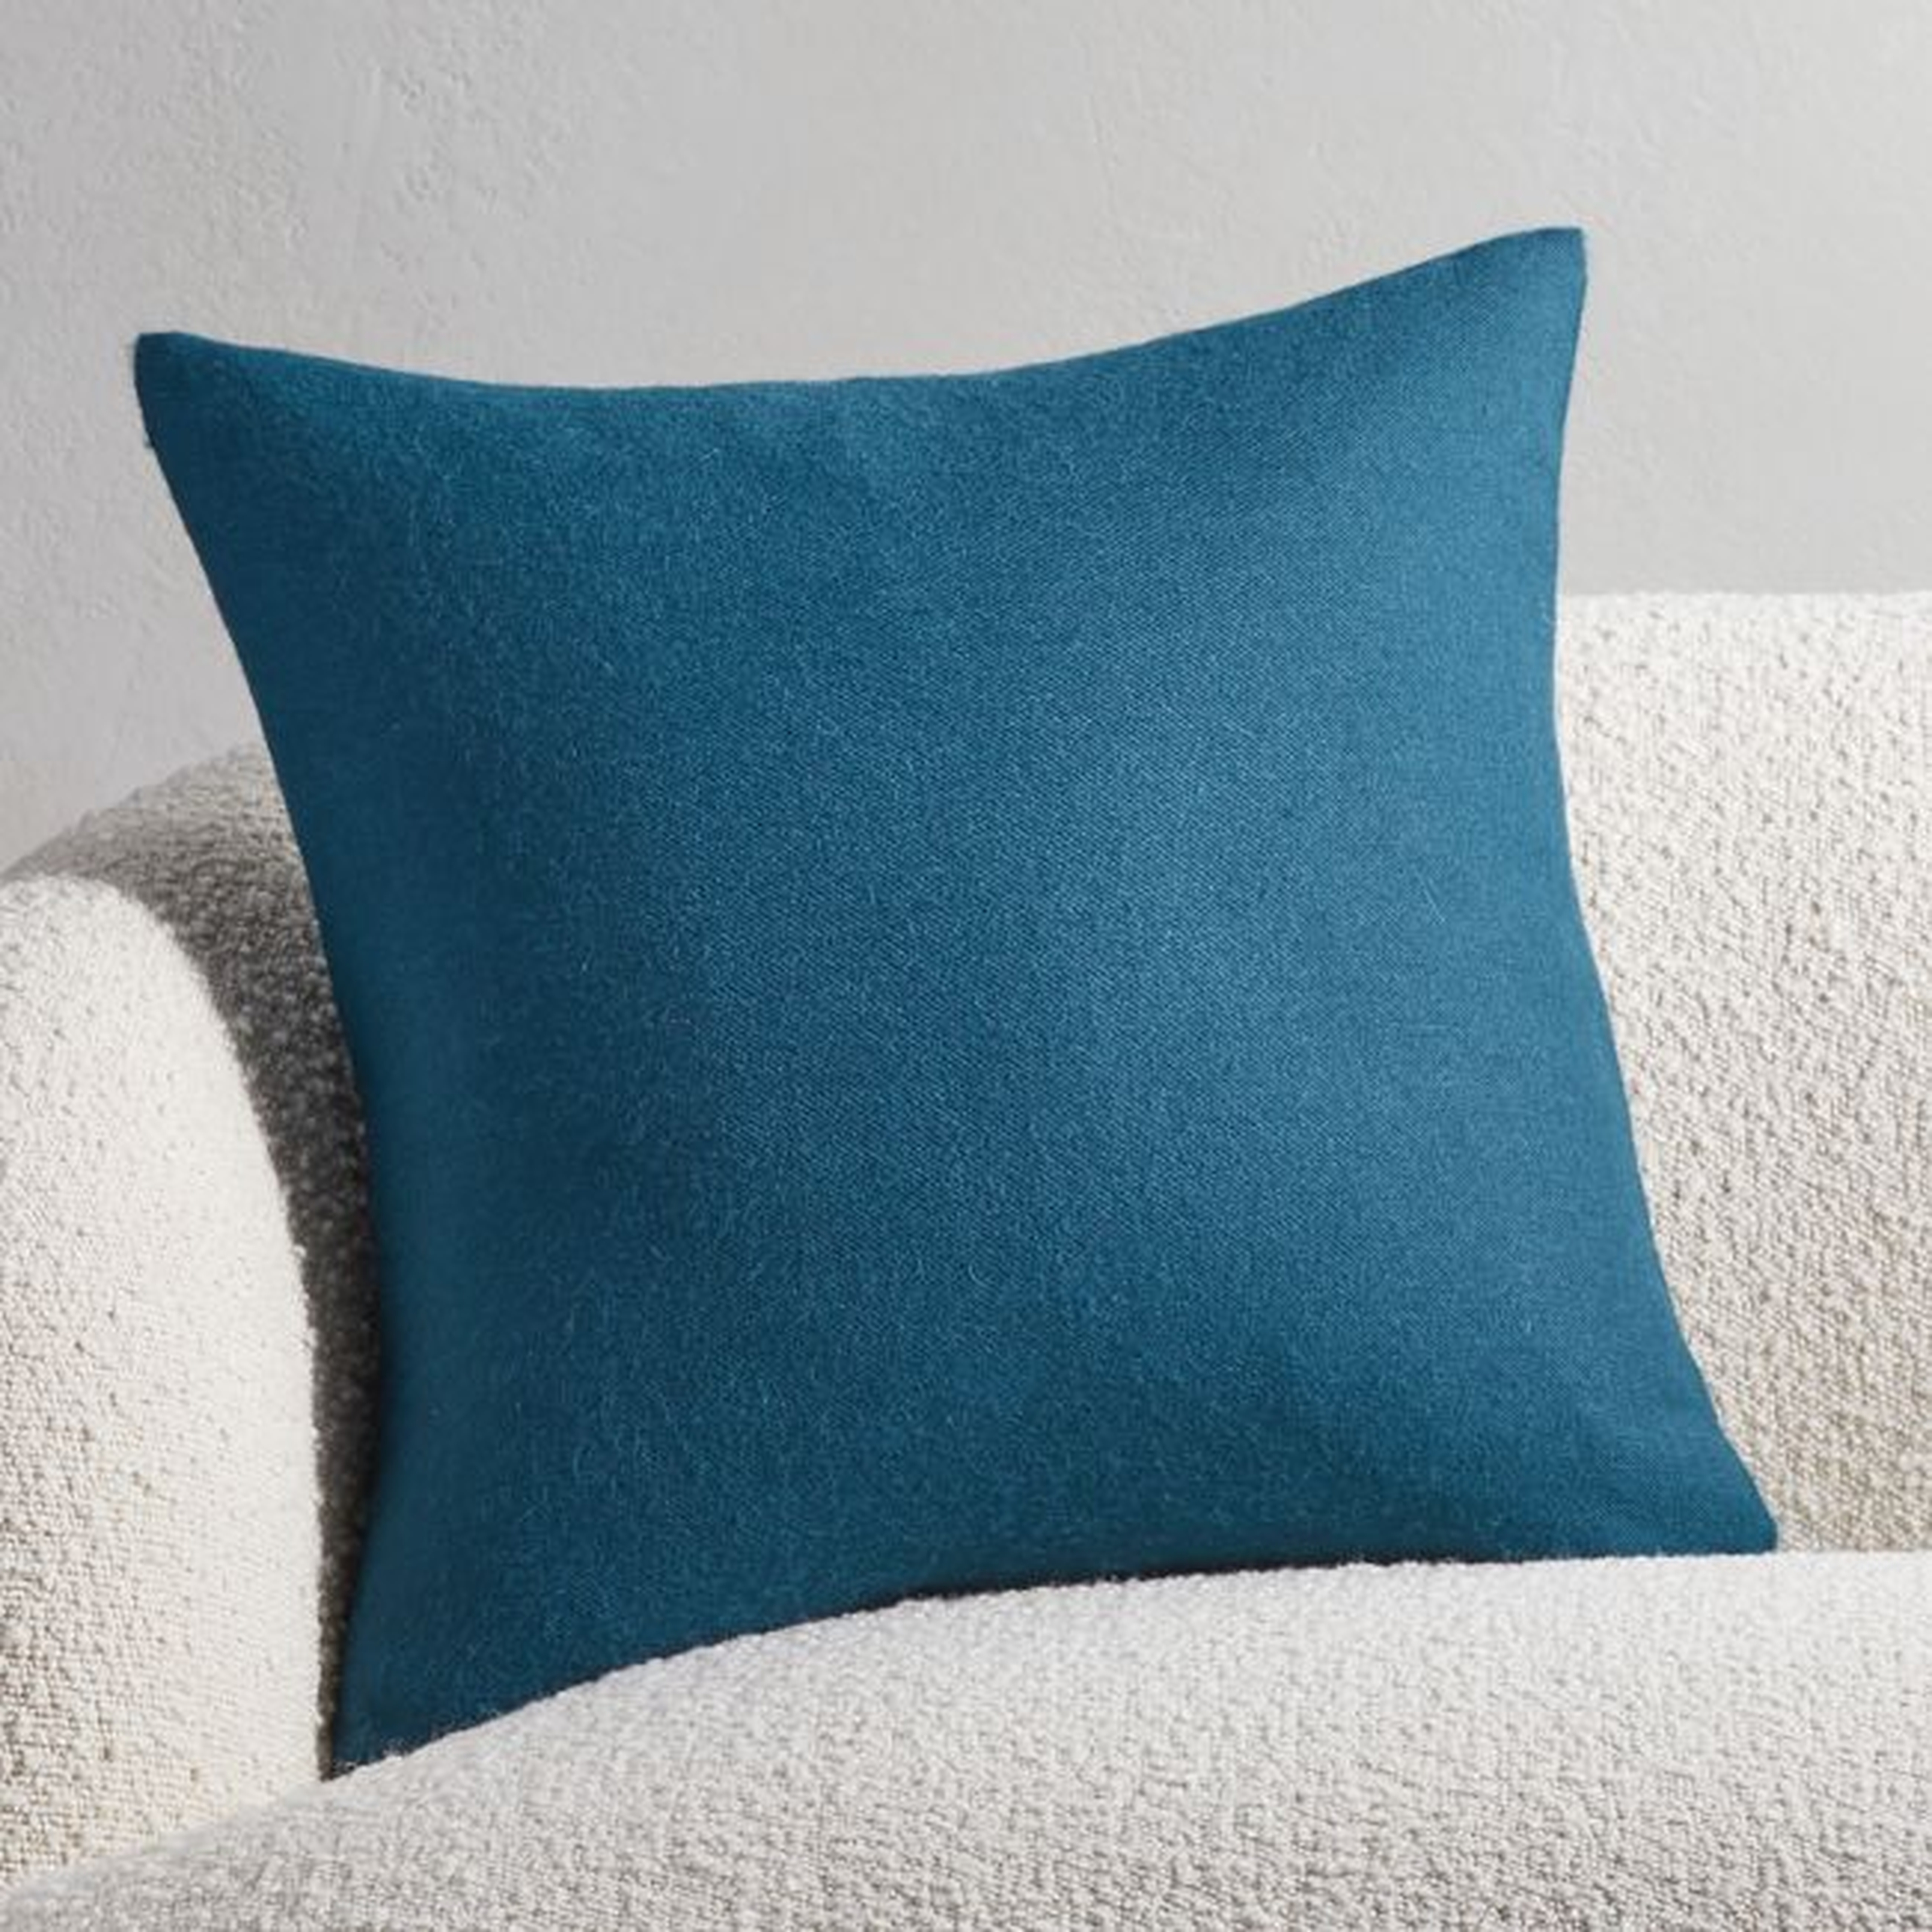 20" Alpaca Teal Pillow with Feather-Down Insert - CB2